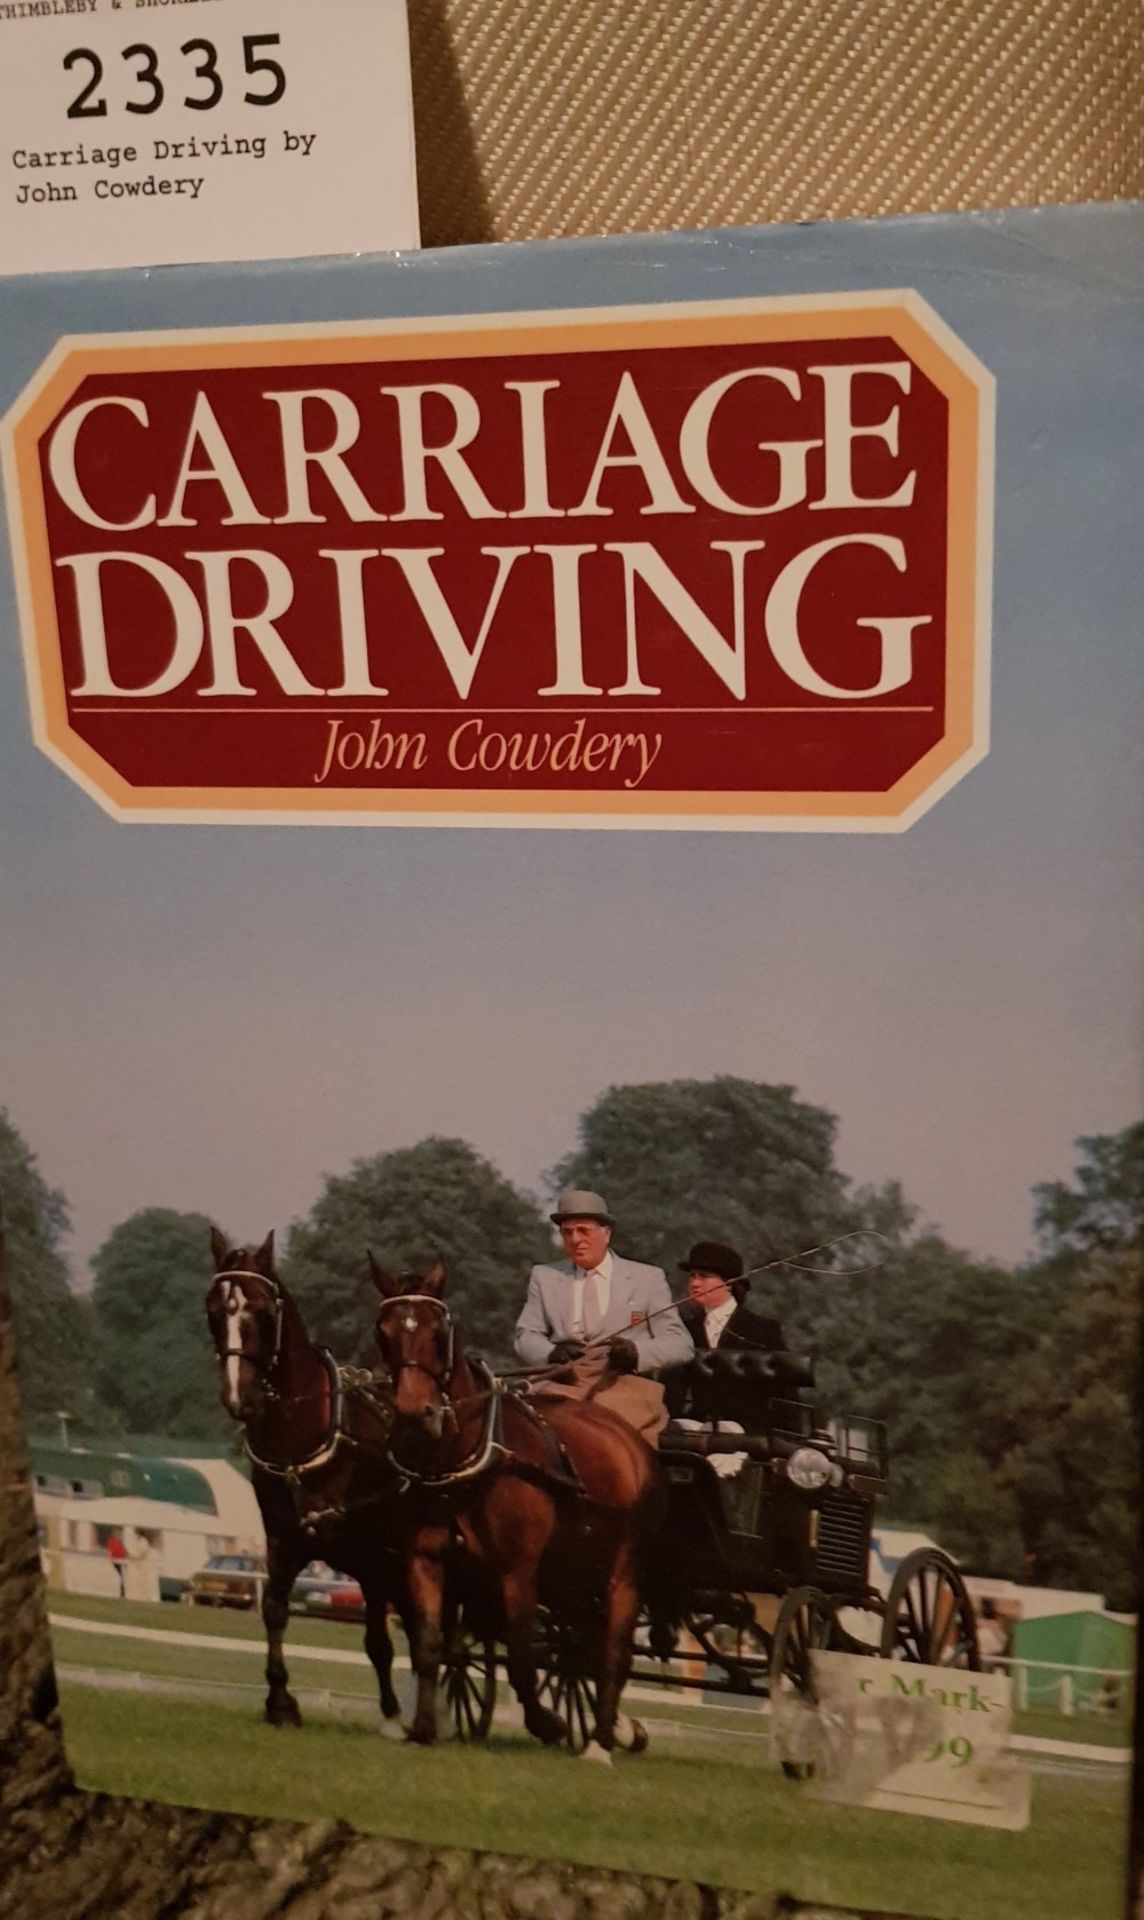 Carriage Driving by John Cowdery